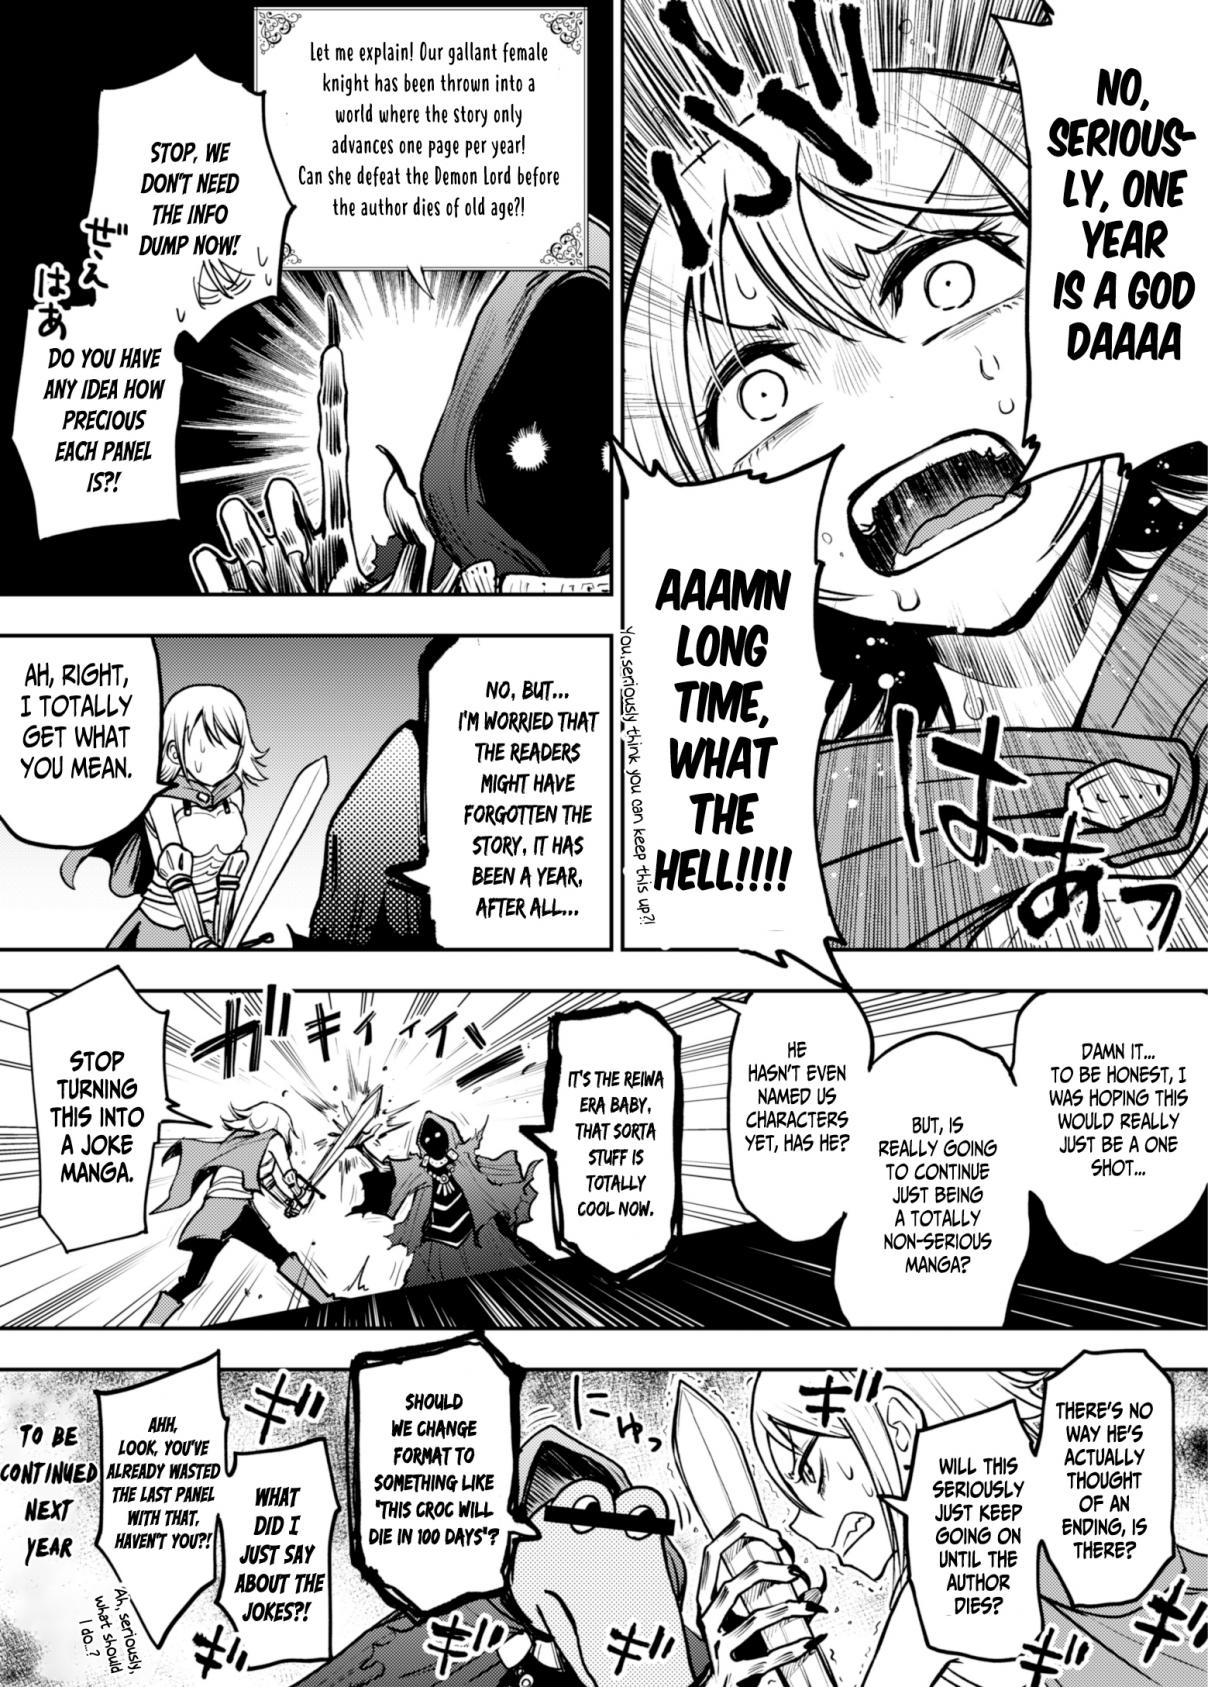 A Manga World That Gets One Page Once A Year Ch. 2 2020